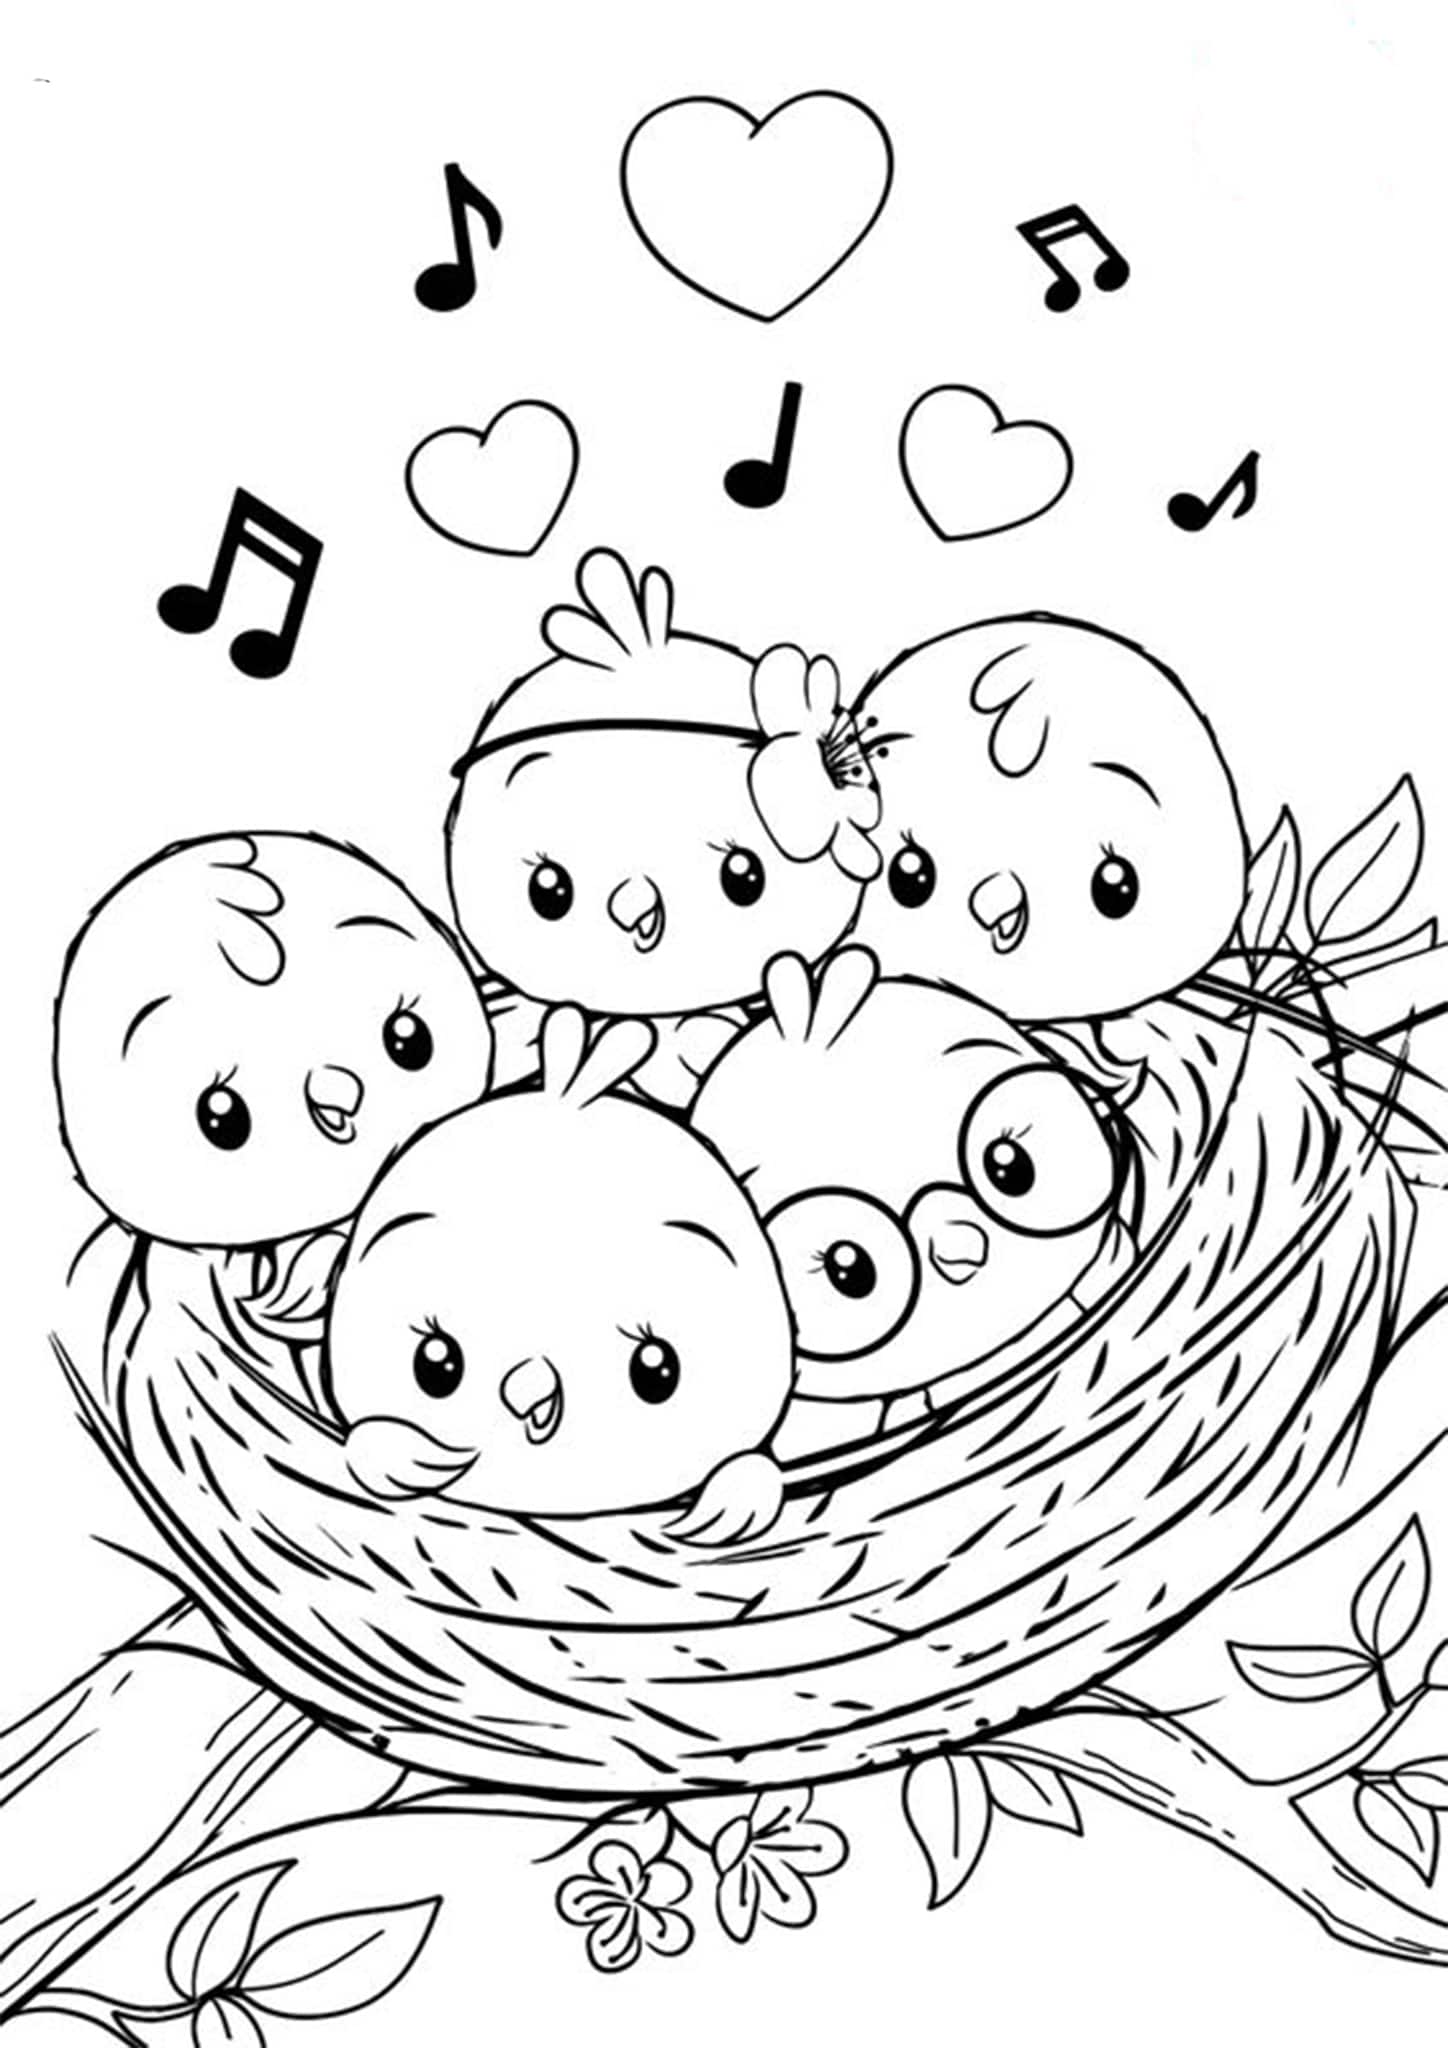 Download Free & Easy To Print Bird Coloring Pages - Tulamama